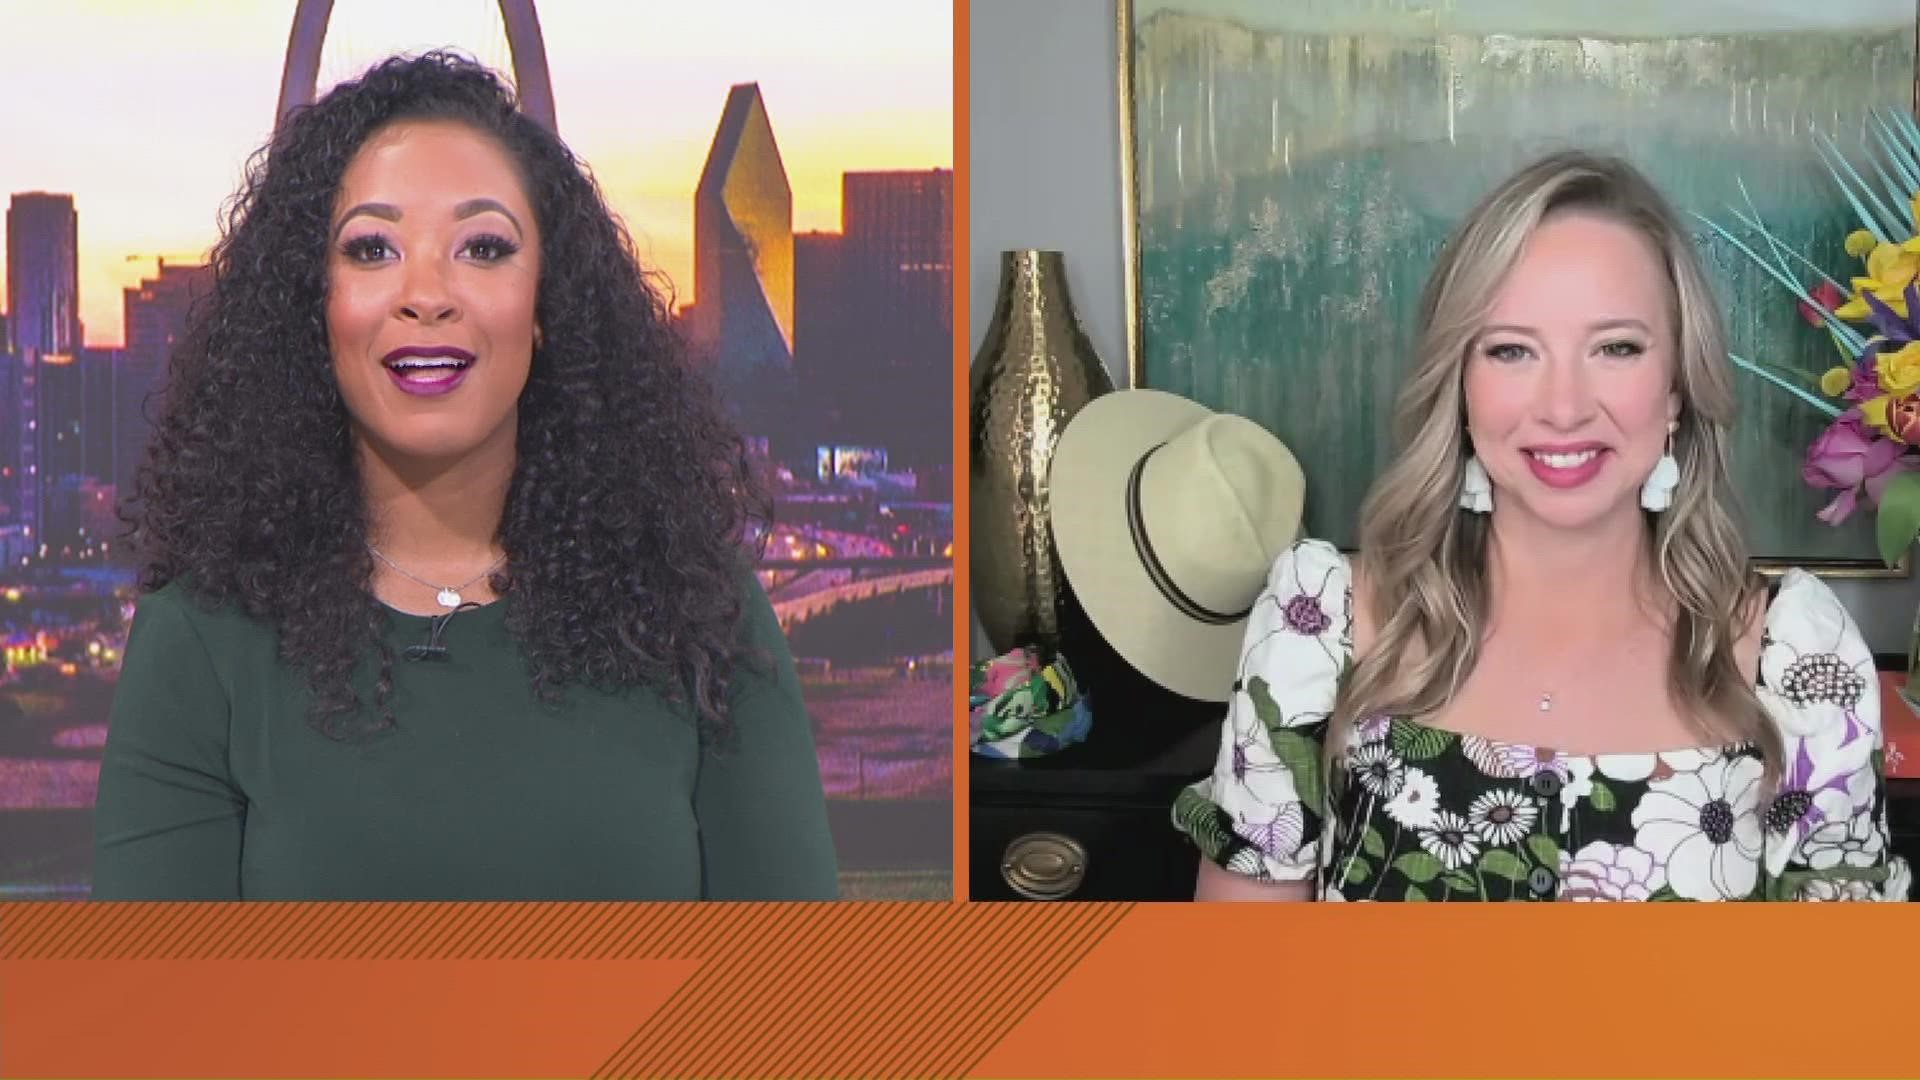 Holly Quartaro, Fashion and Lifestyle Director at Galleria Dallas, joined WFAA Daybreak to talk about the events going on there this weekend.